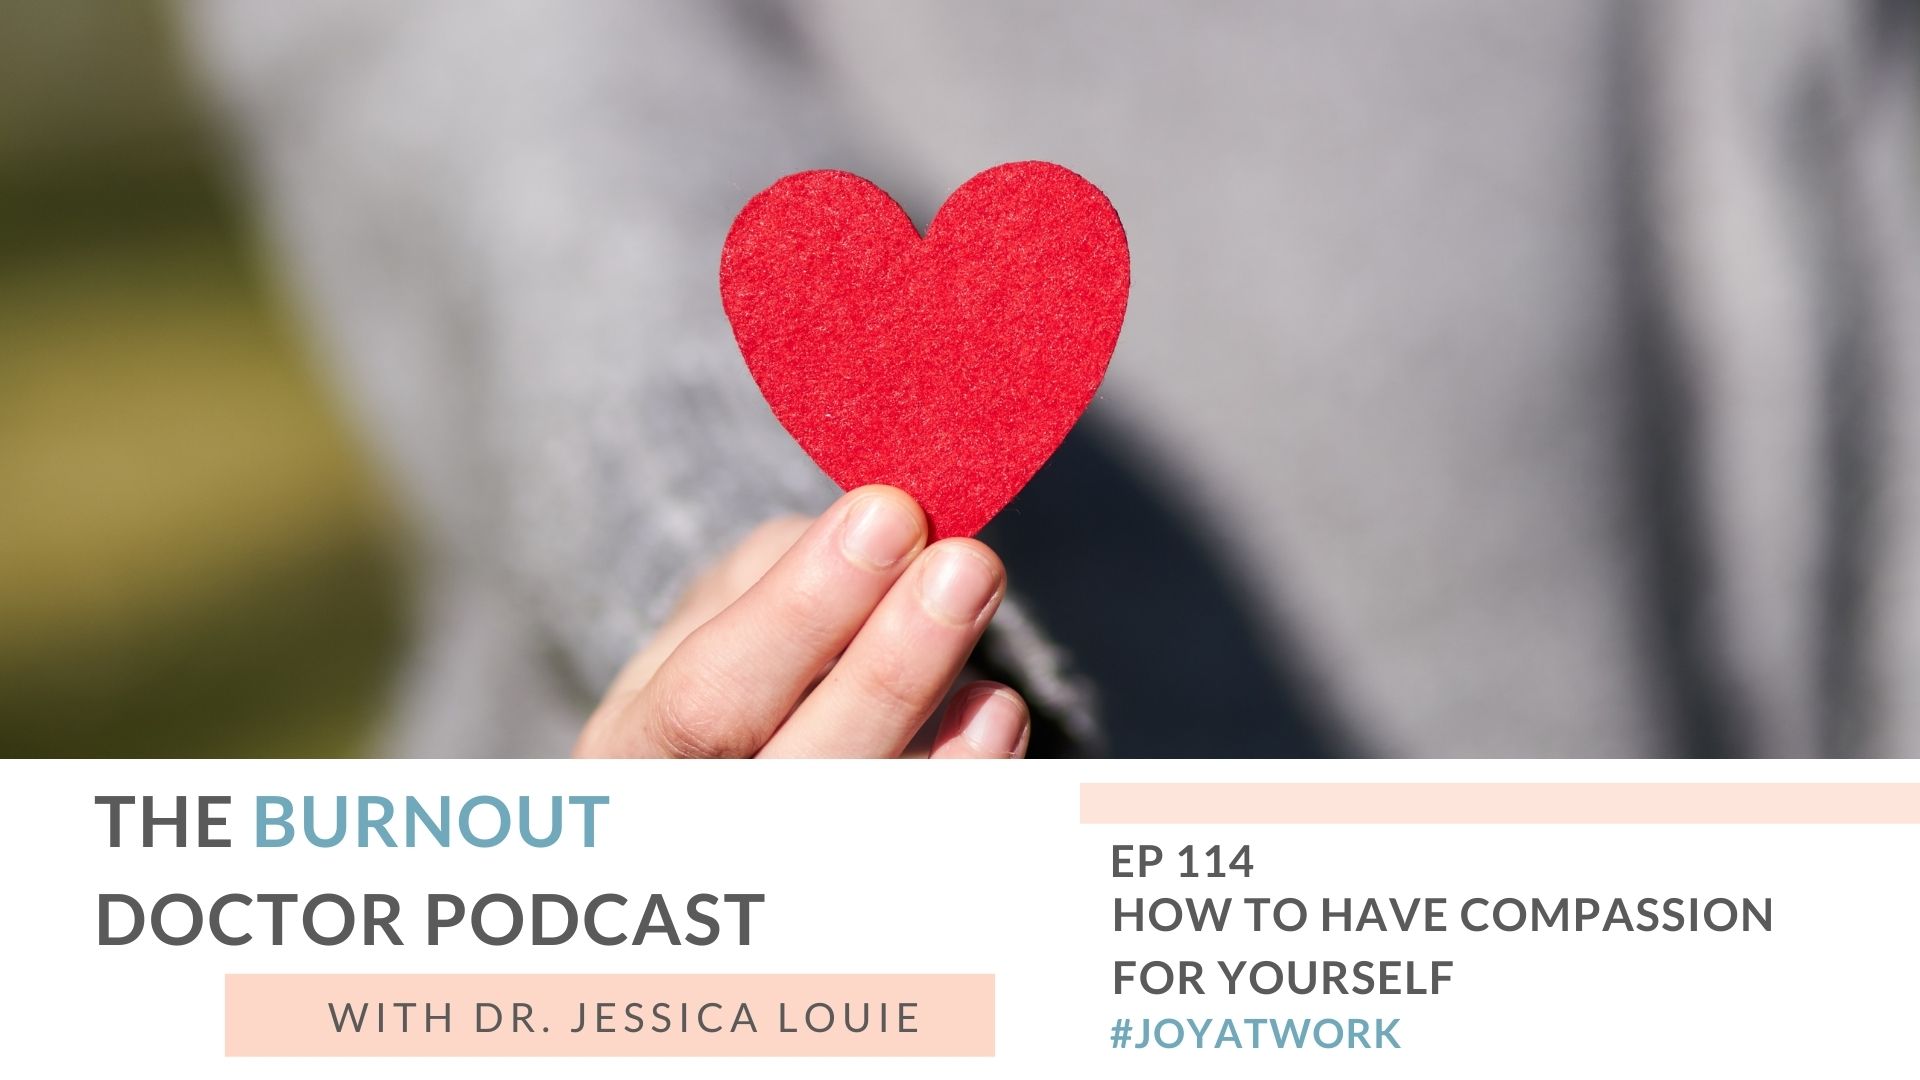 How to have compassion for yourself to heal burnout. Compassion and grace for pharmacist burnout and healthcare burnout. Burnout coaching to stop negative self talk. The Burnout Doctor Podcast by Dr. Jessica Louie.